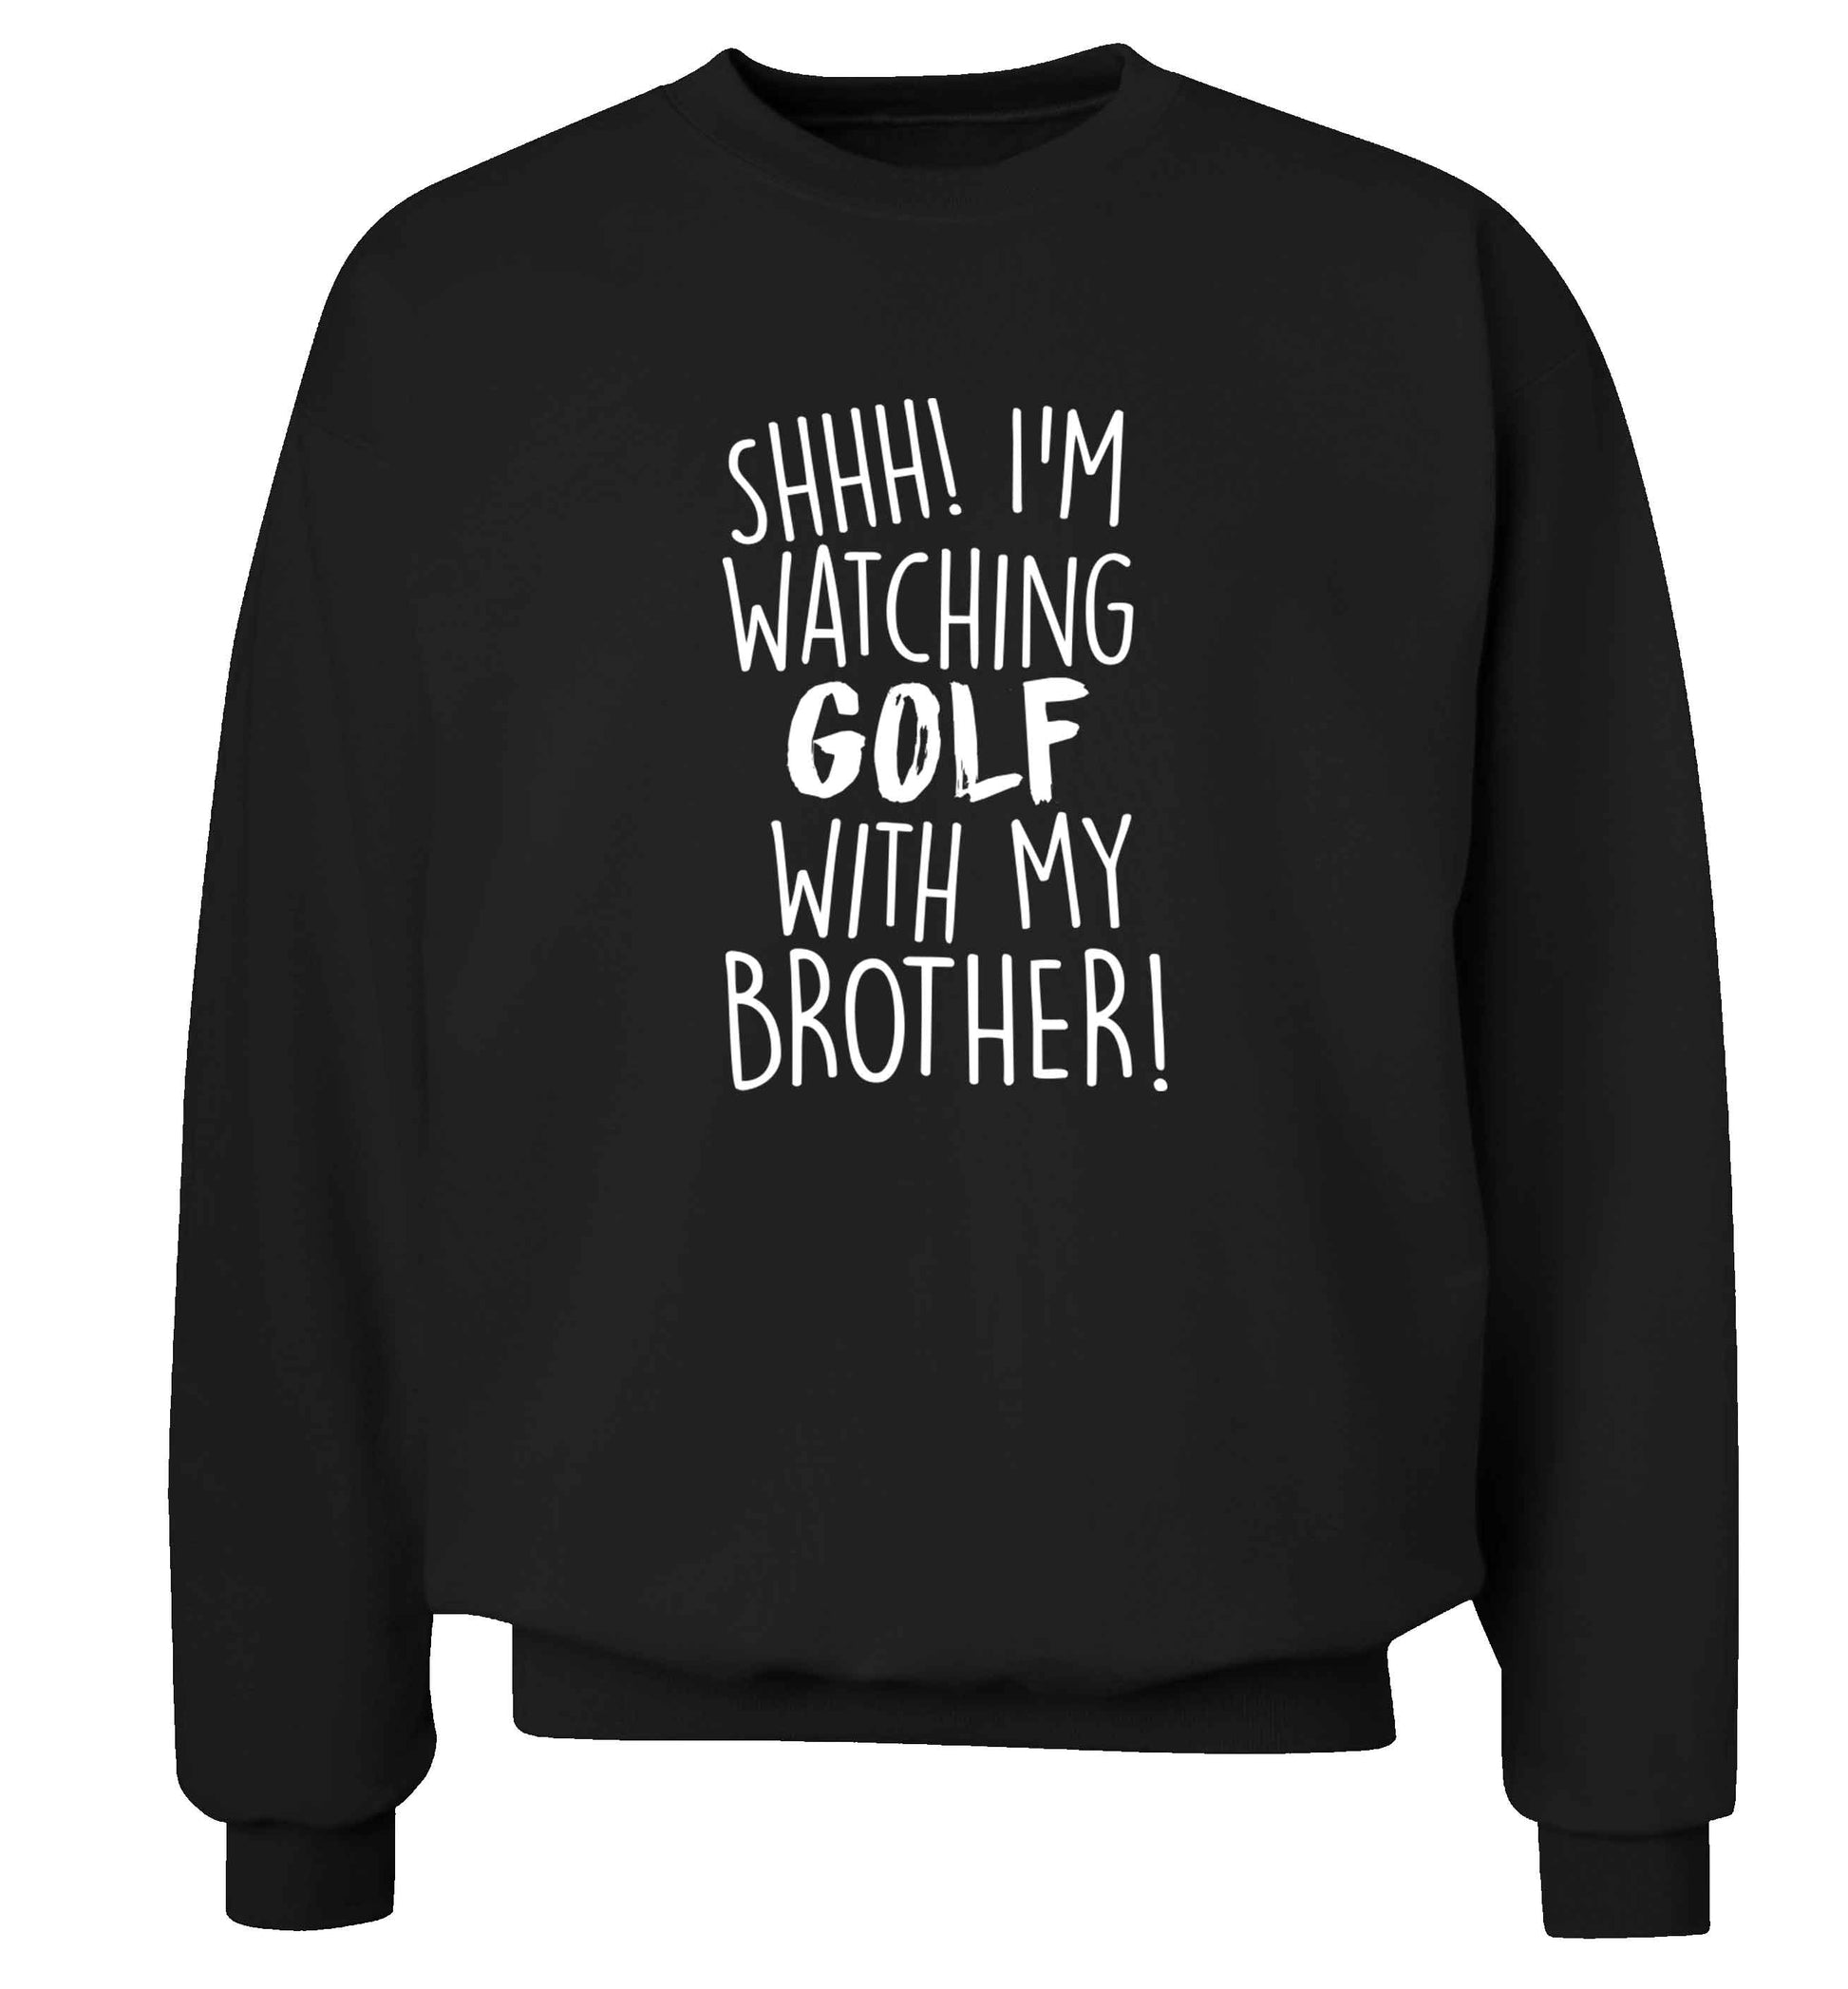 Shh I'm watching golf with my brother Adult's unisex black Sweater 2XL